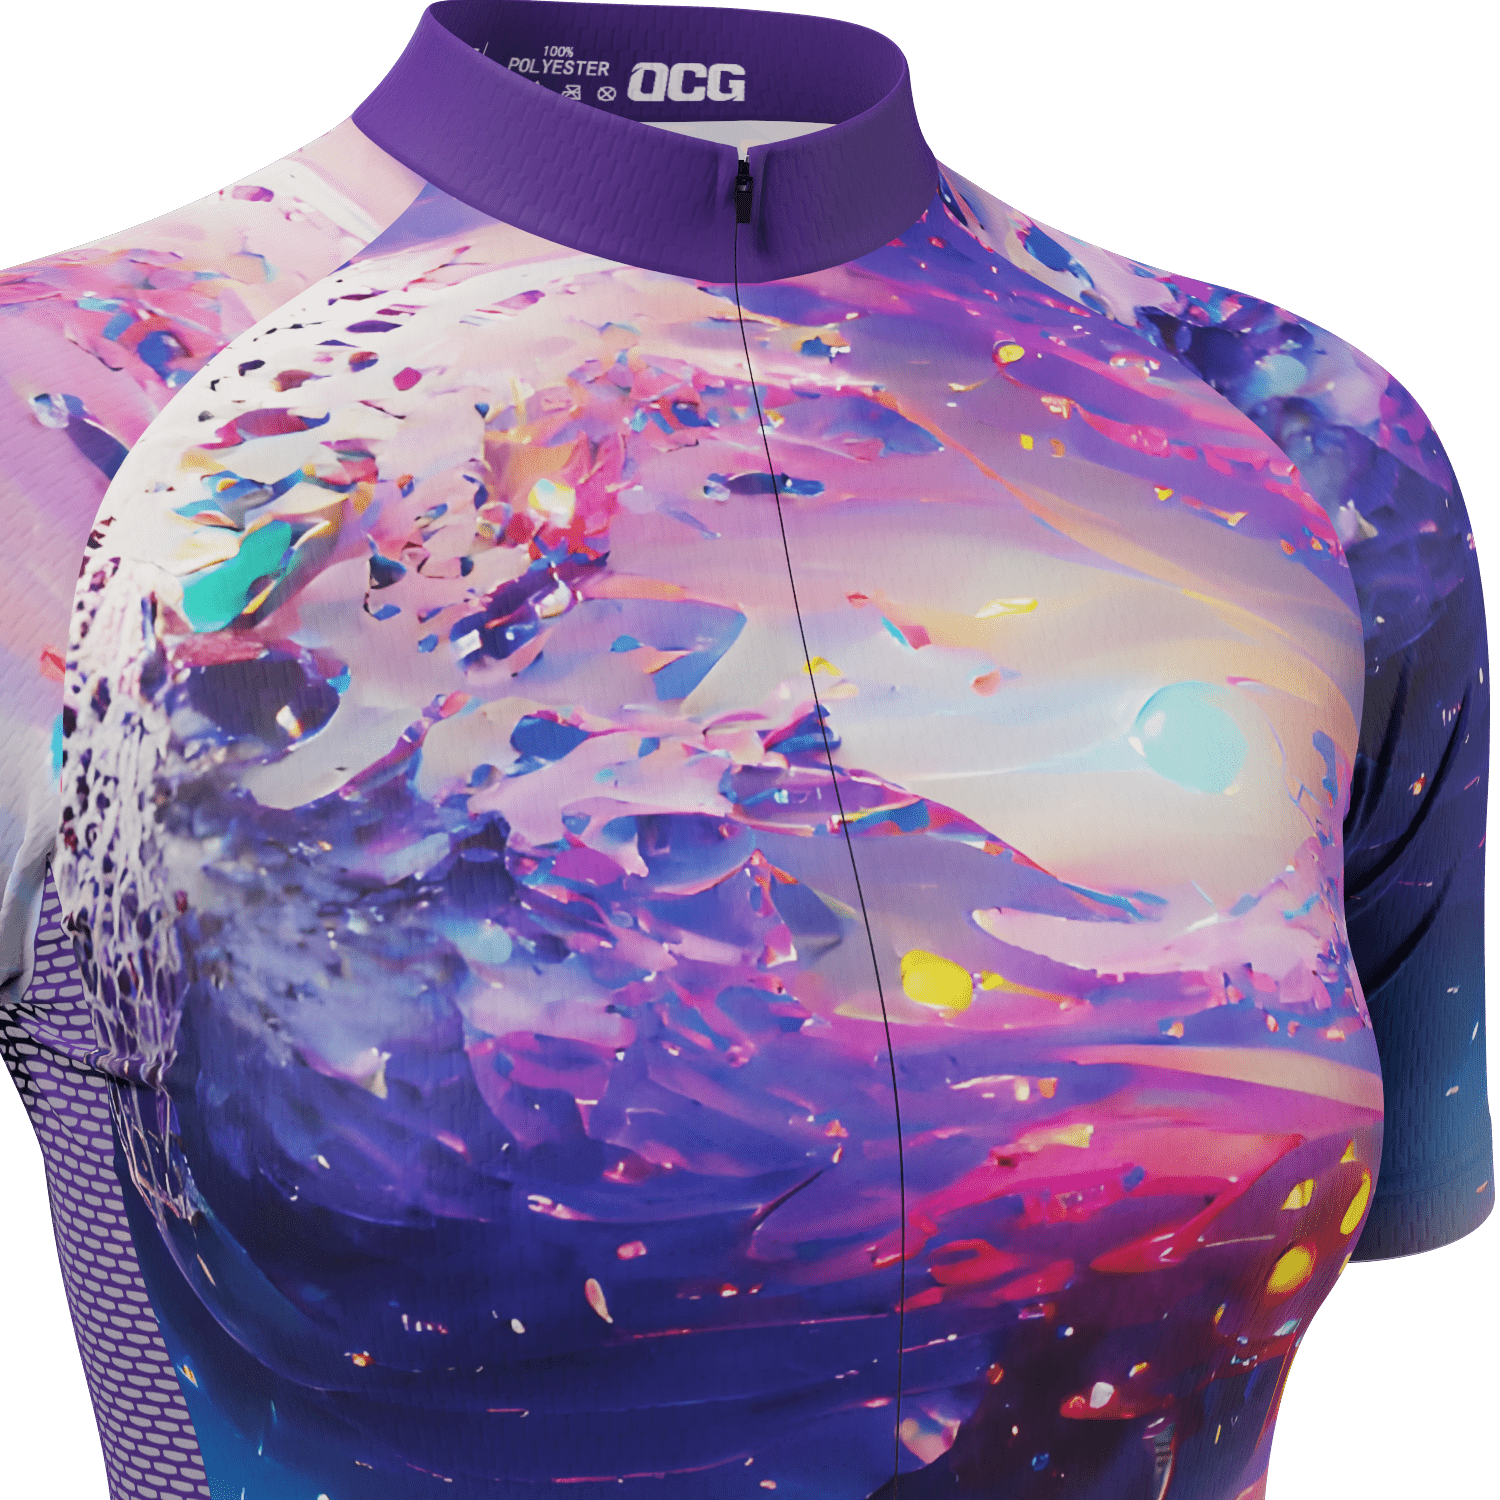 Women's Planets Short Sleeve Cycling Jersey